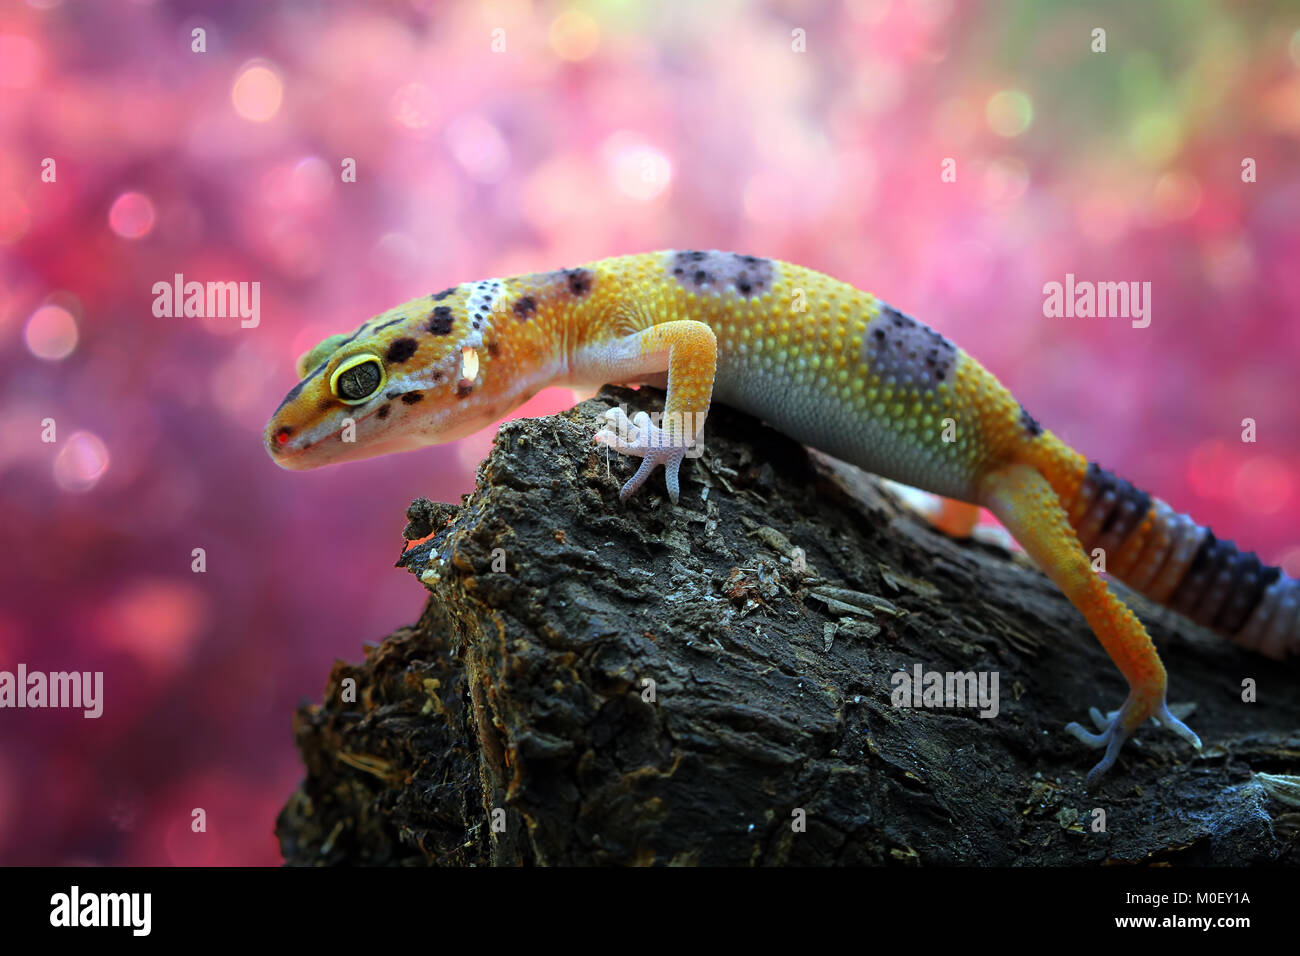 Close-up of a leopard gecko on a rock Stock Photo